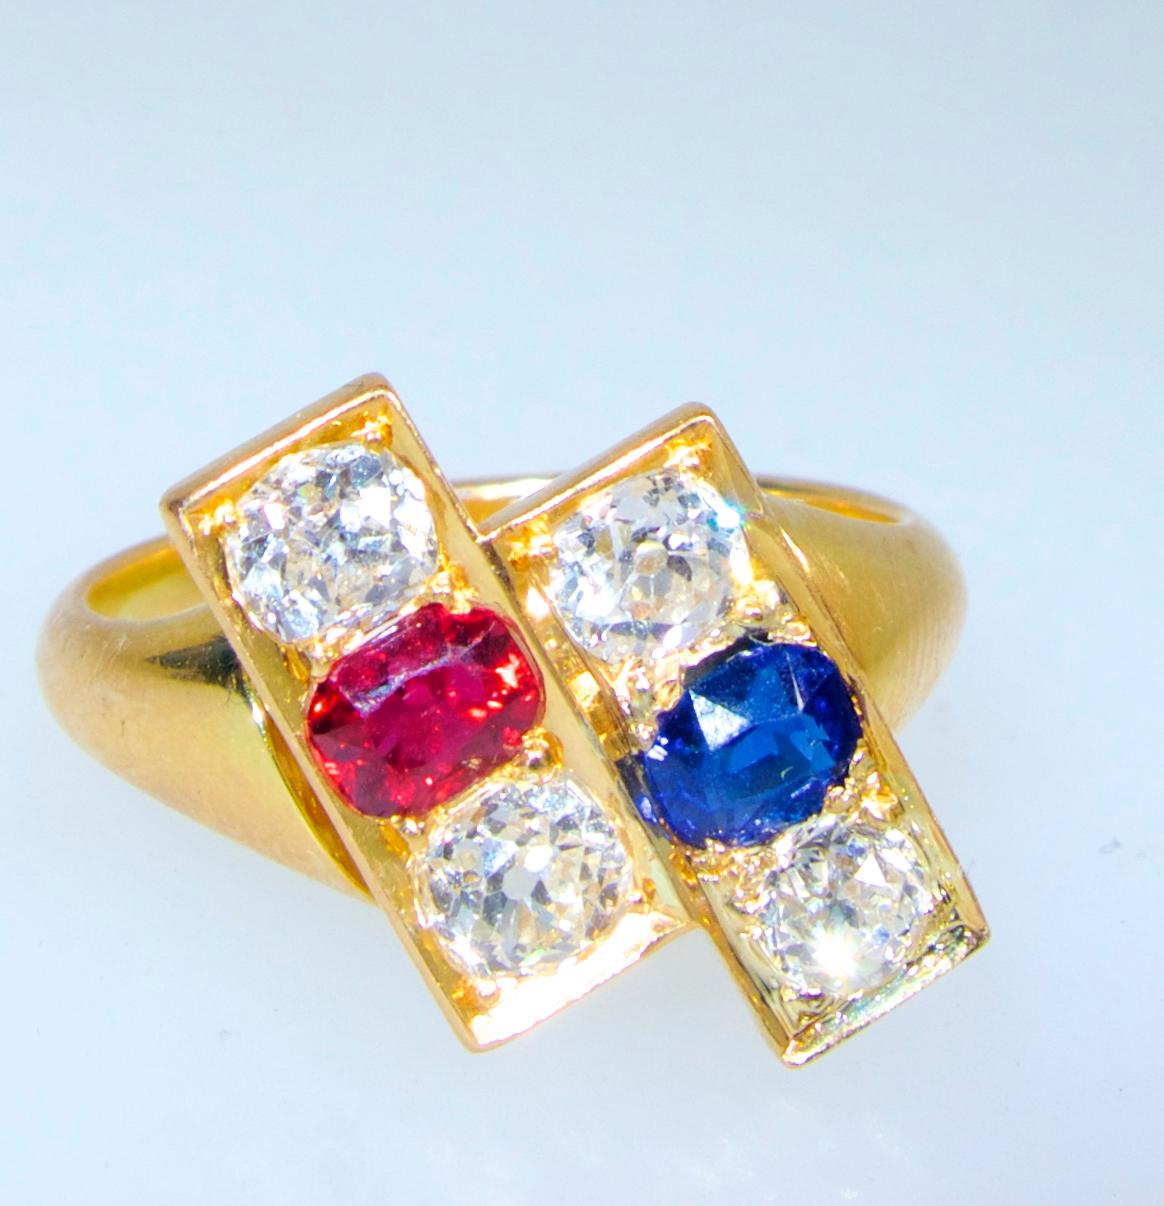 Antique and unusual, this ring is 18K and possesses a fine sapphire and a fine ruby, set side by side in an unusual twist to the classic moi et toi motif.  The fine natural sapphire and ruby each weigh approximately .33 cts.  The fine old cut four